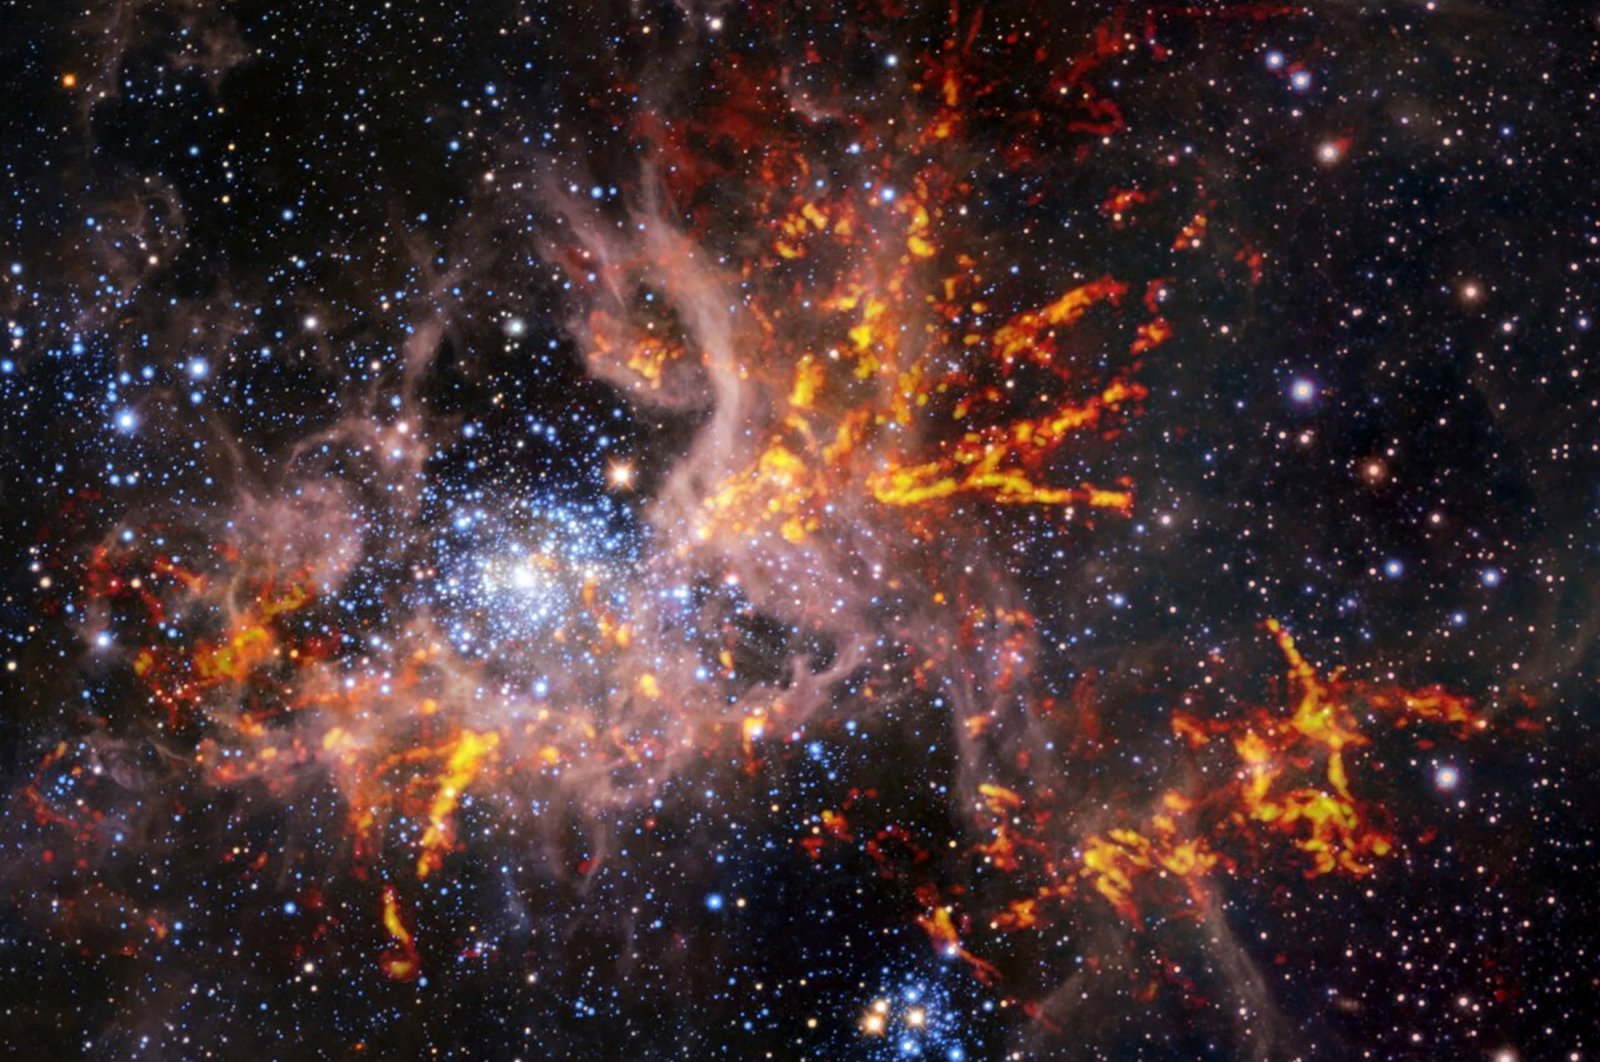 A composite image shows the star-forming region called 30 Doradus, also known as the Tarantula Nebula. (Reuters Photo)